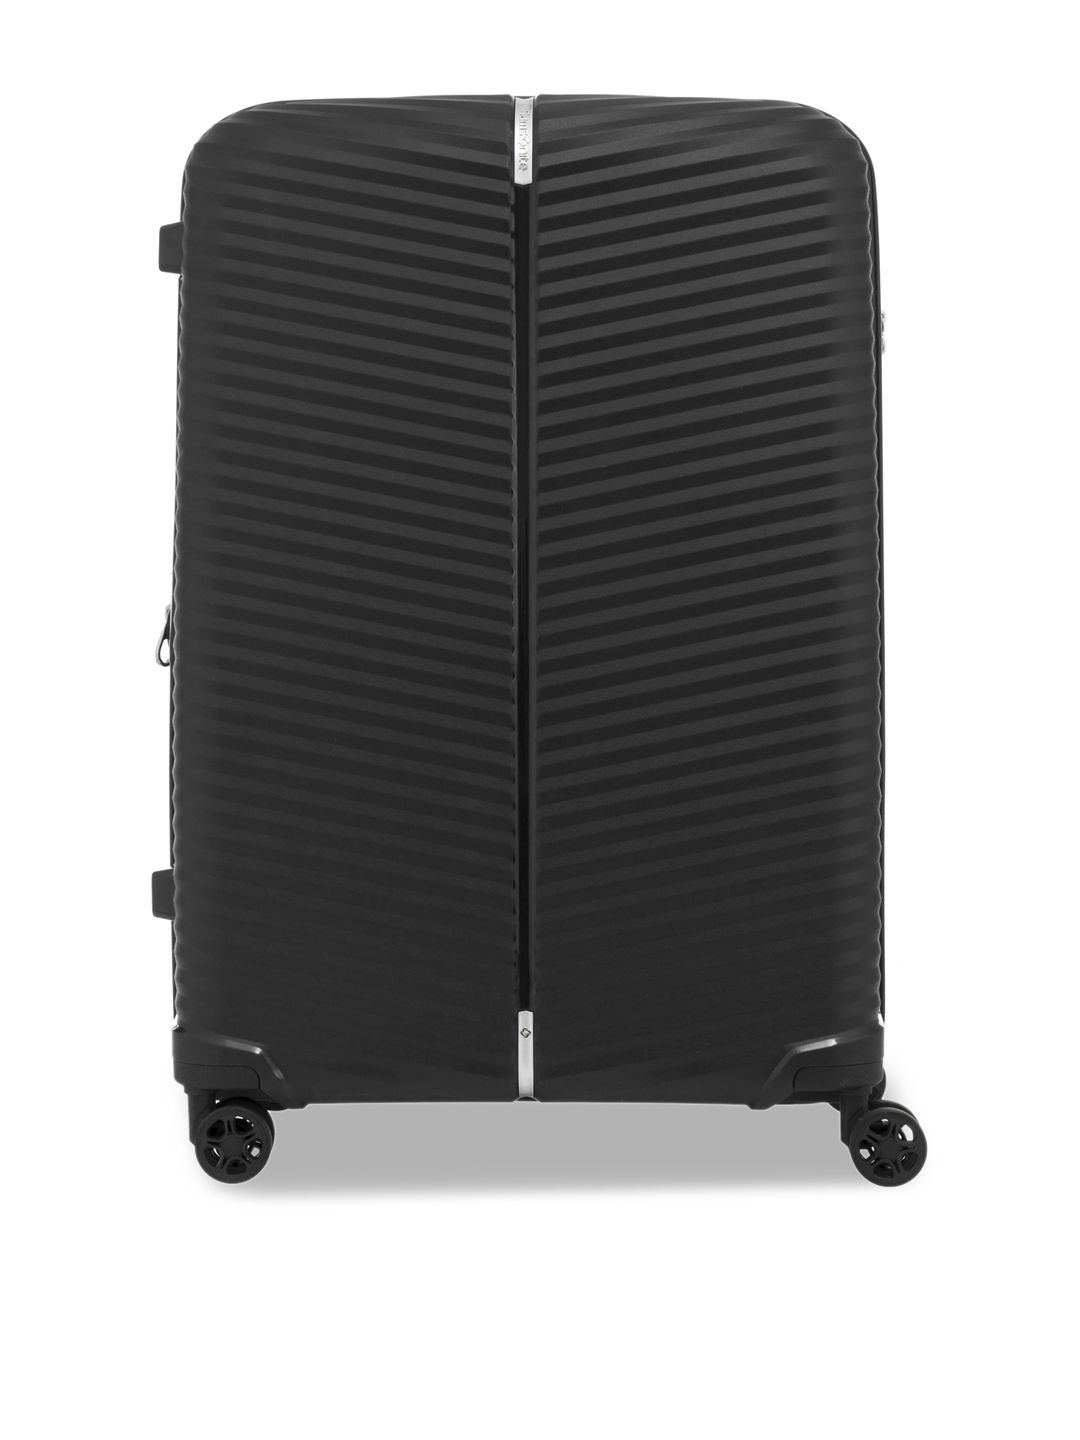 Samsonite Black Textured Hard Sided Large Trolley Suitcase Price in India